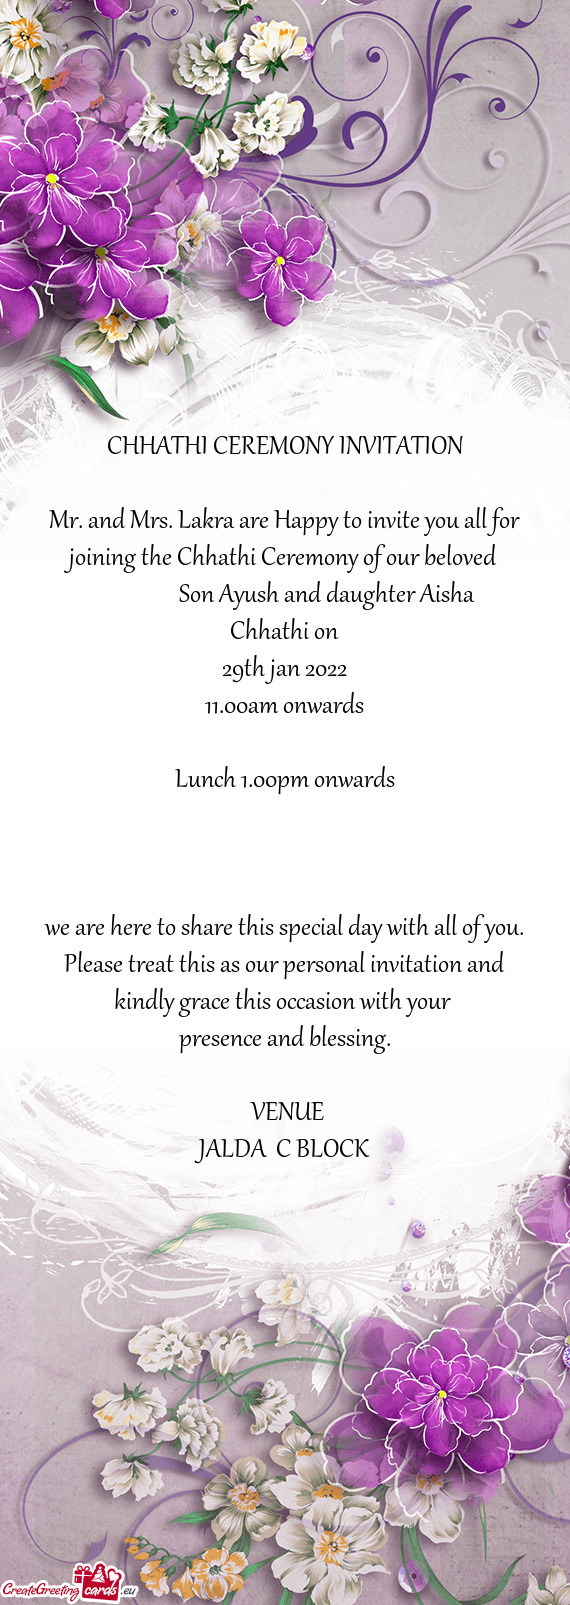 Mr. and Mrs. Lakra are Happy to invite you all for joining the Chhathi Ceremony of our beloved